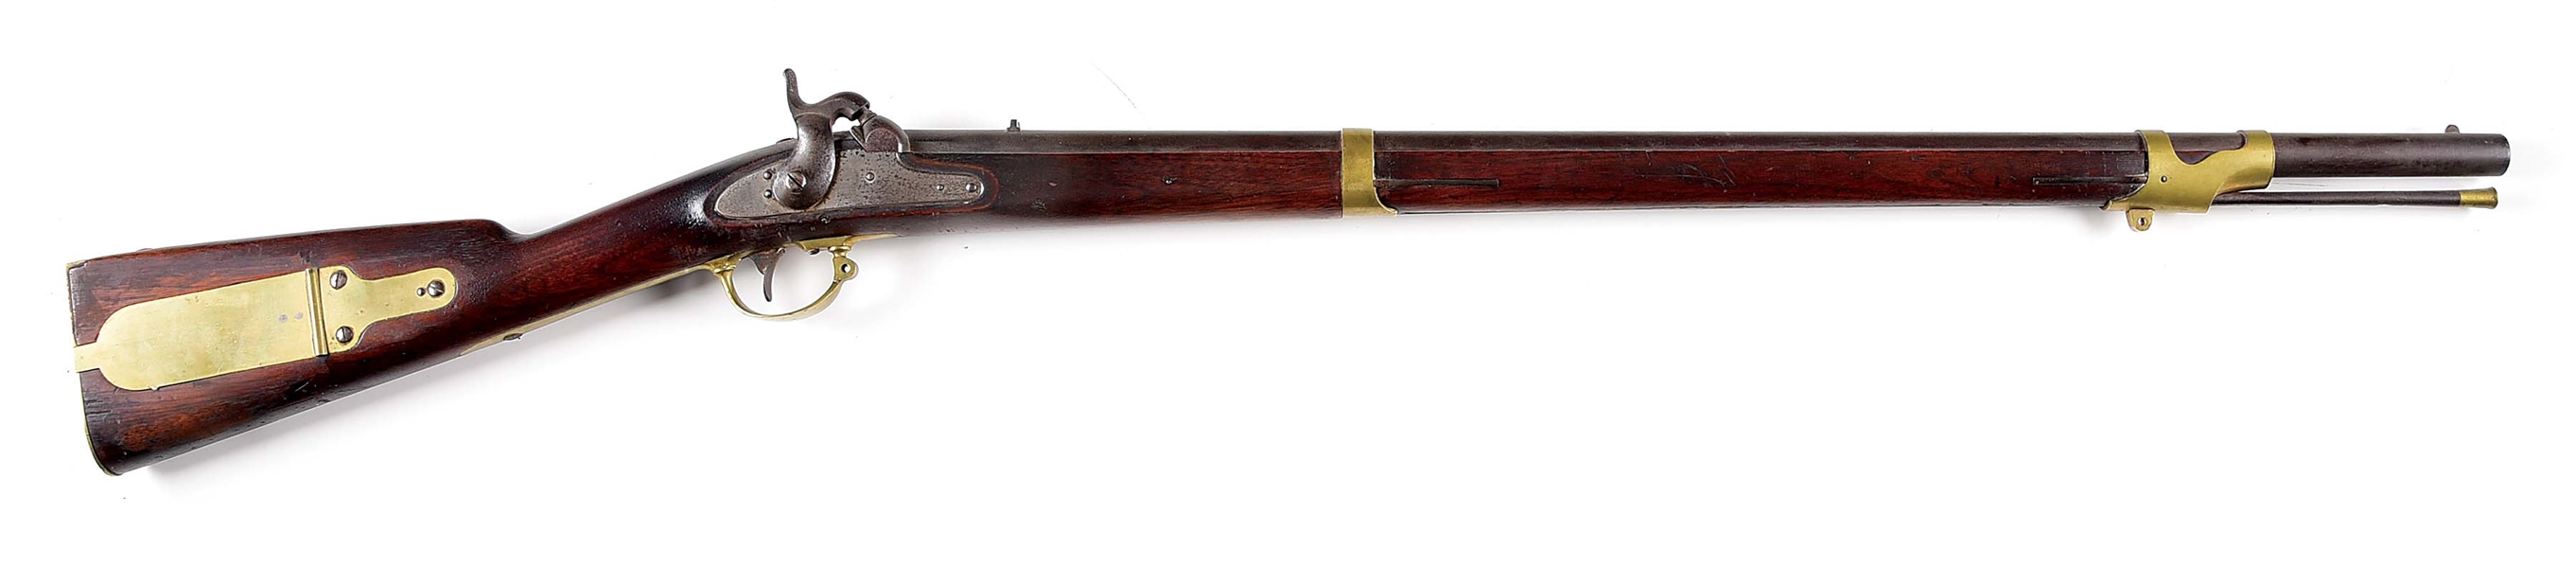 (A) US MODEL 1841 MISSISSIPPI RIFLE BY ROBBINS, KENDALL, AND LAWRENCE DATED 1847.